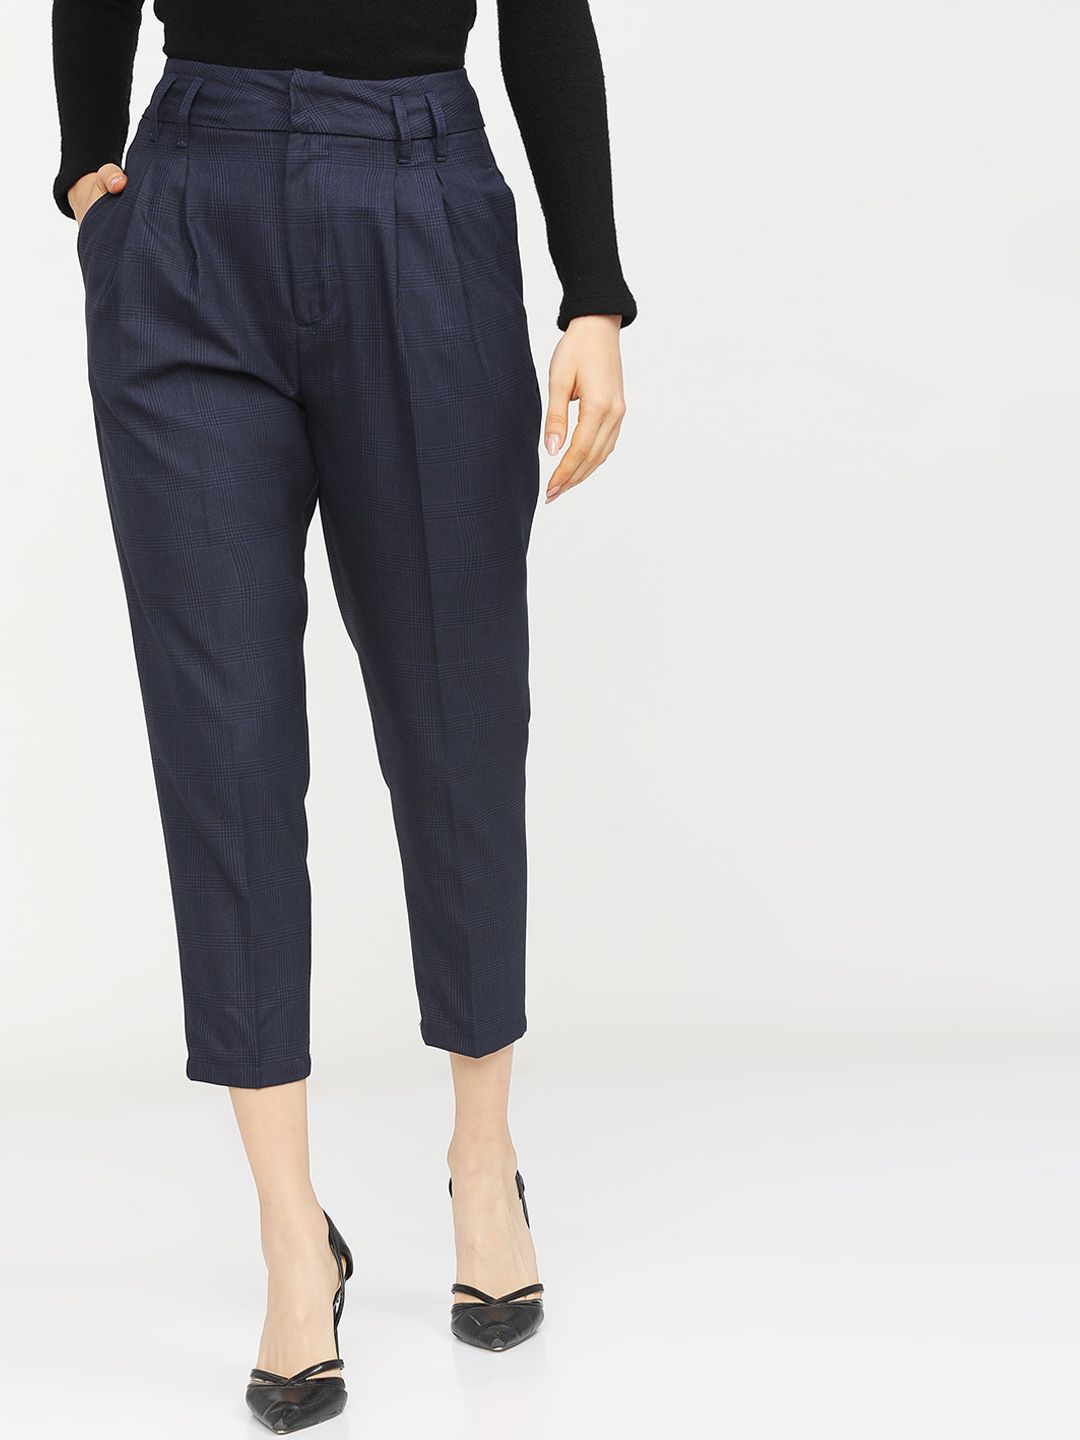 Tokyo Talkies Women Navy Blue Checked Pleated Peg Trousers Price in India